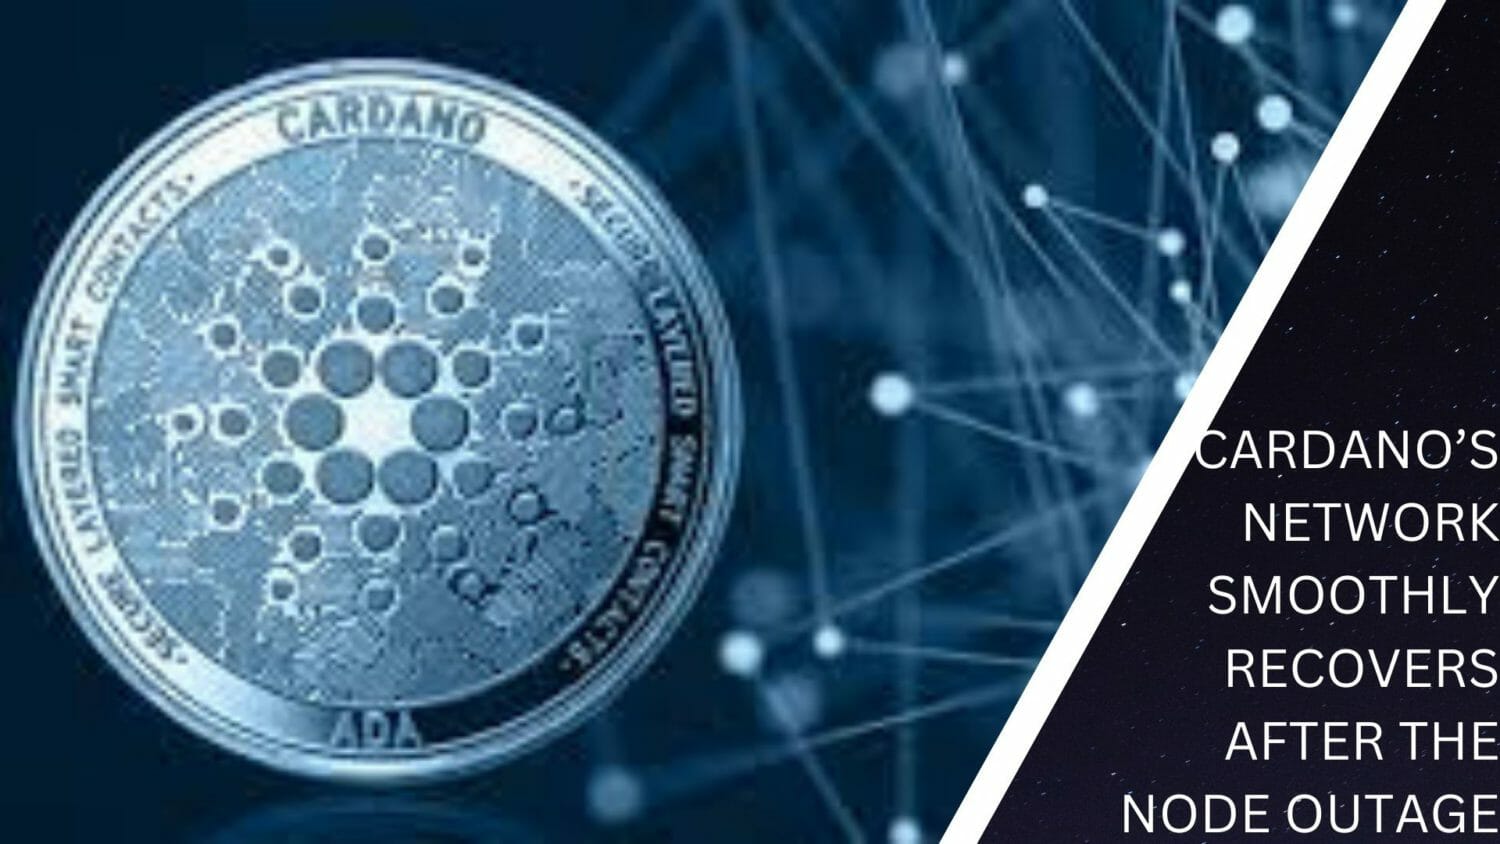 Cardano’s Network Smoothly Recovers After The Node Outage